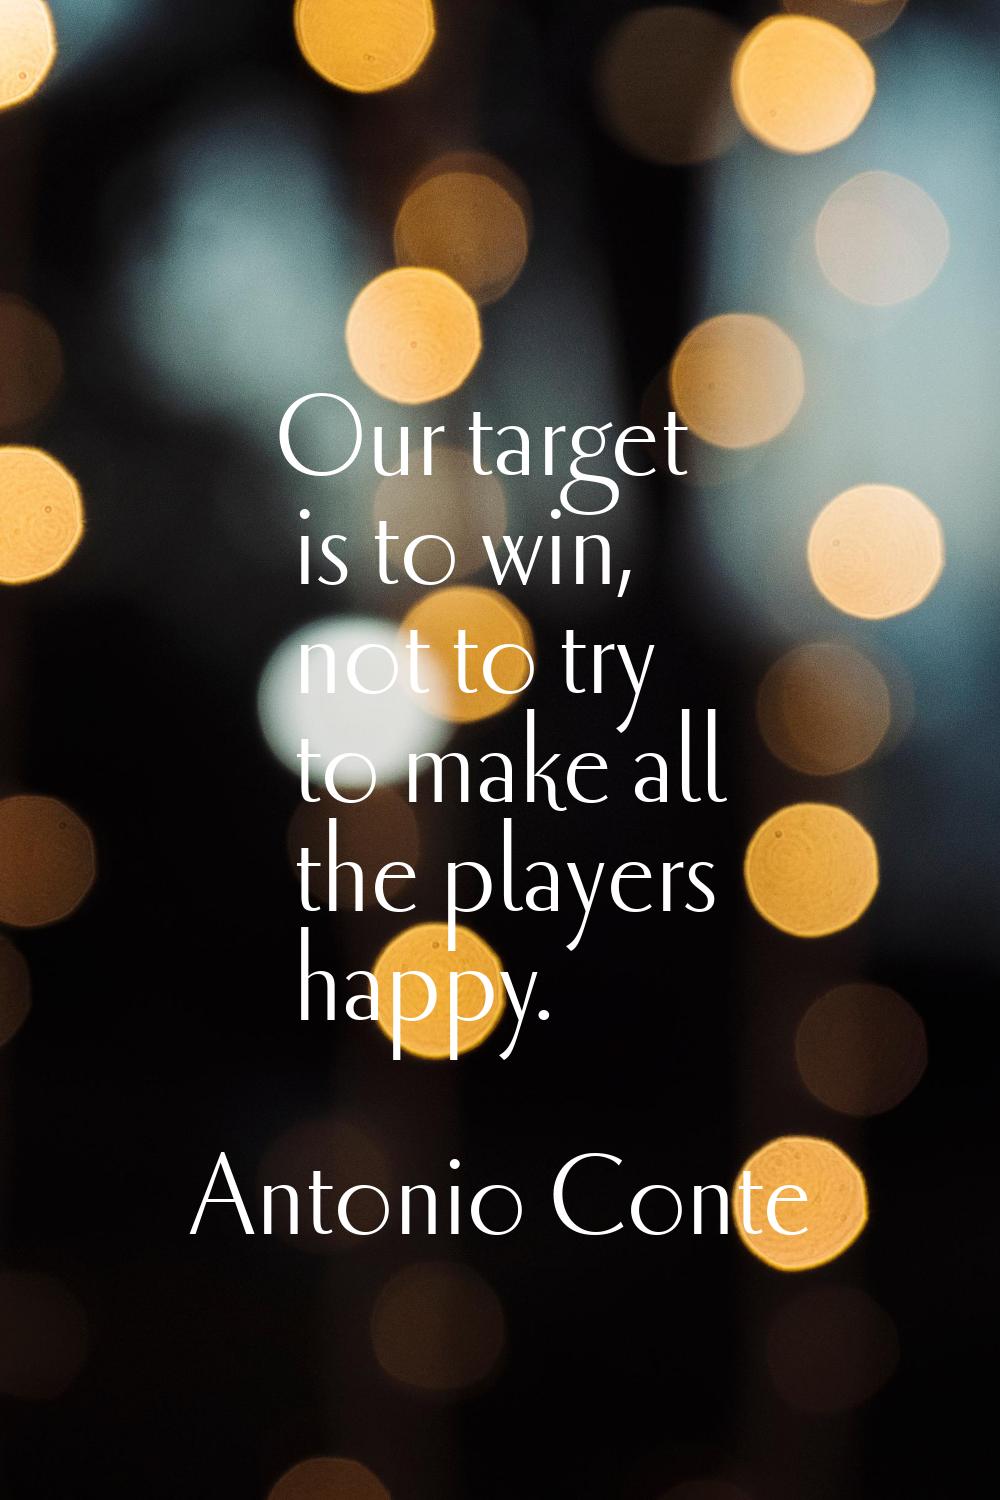 Our target is to win, not to try to make all the players happy.